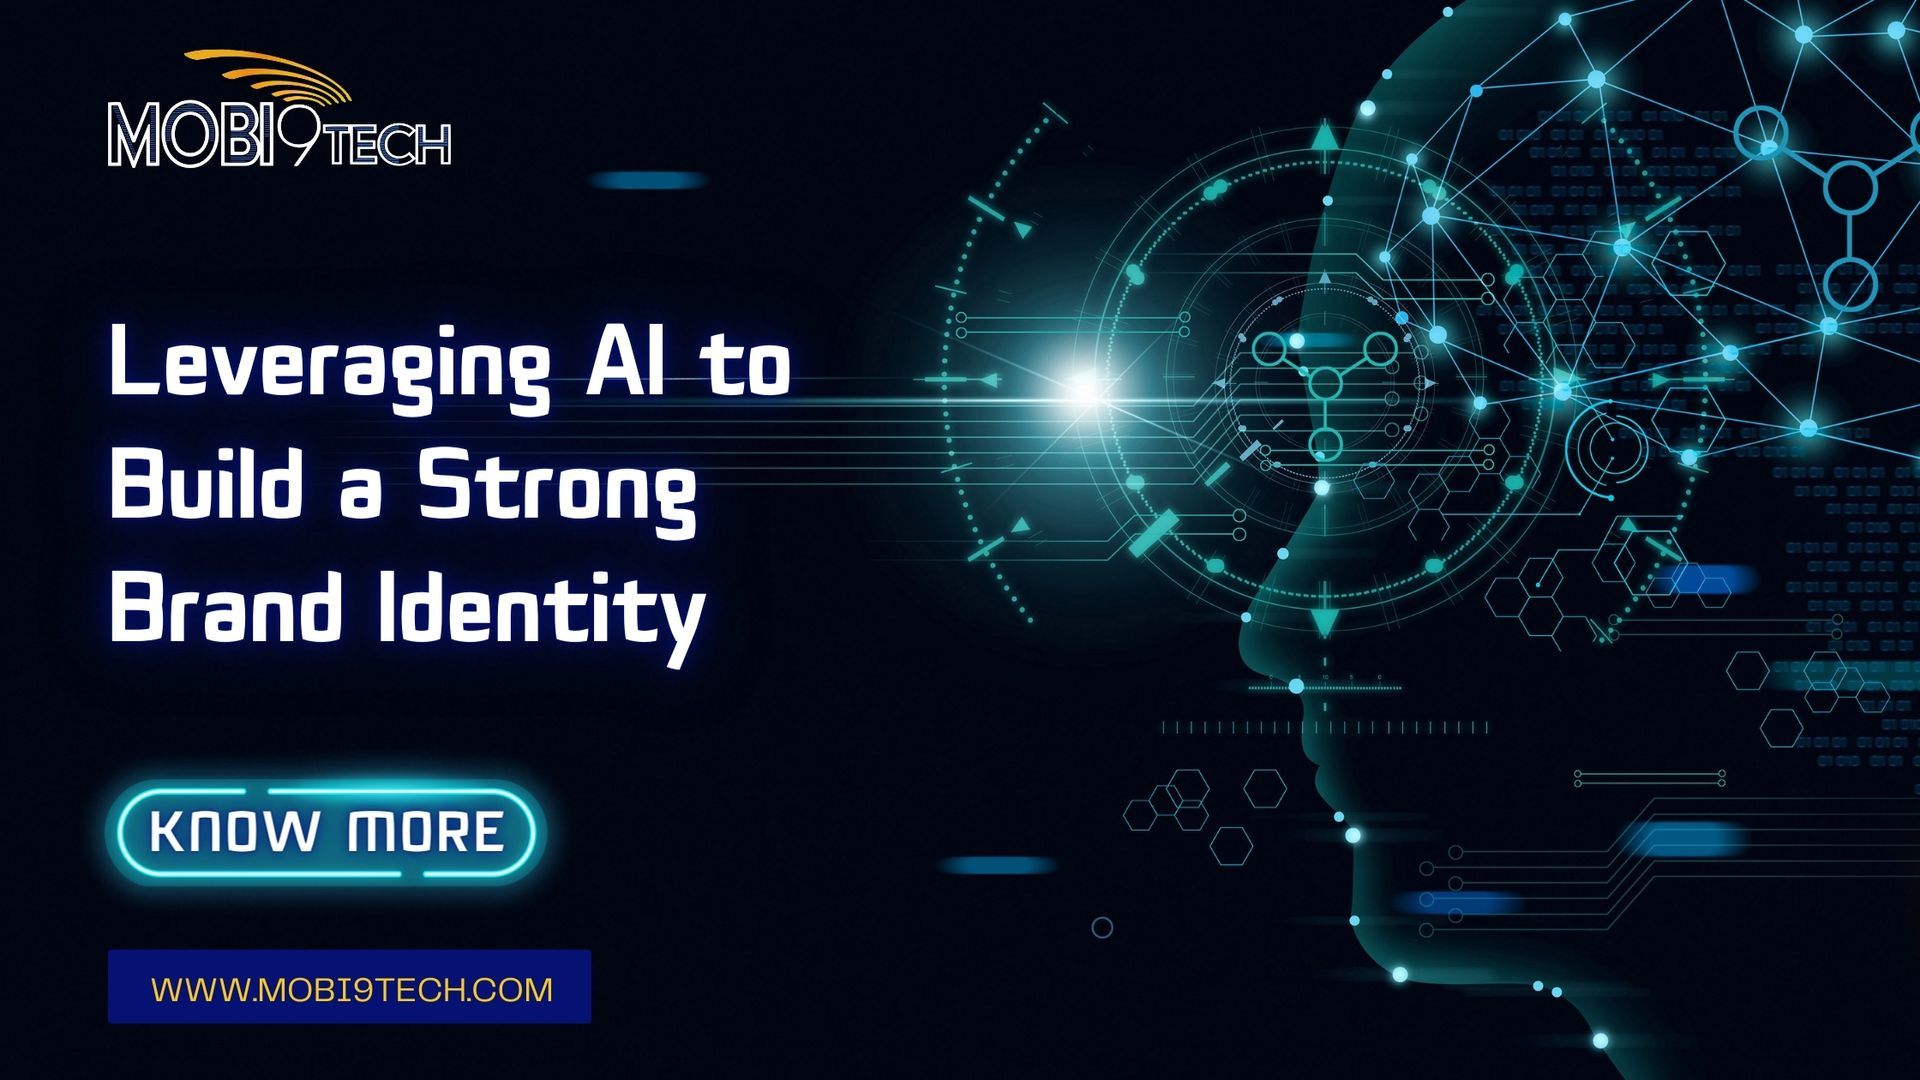 Leveraging AI to Build a Strong Brand Identity